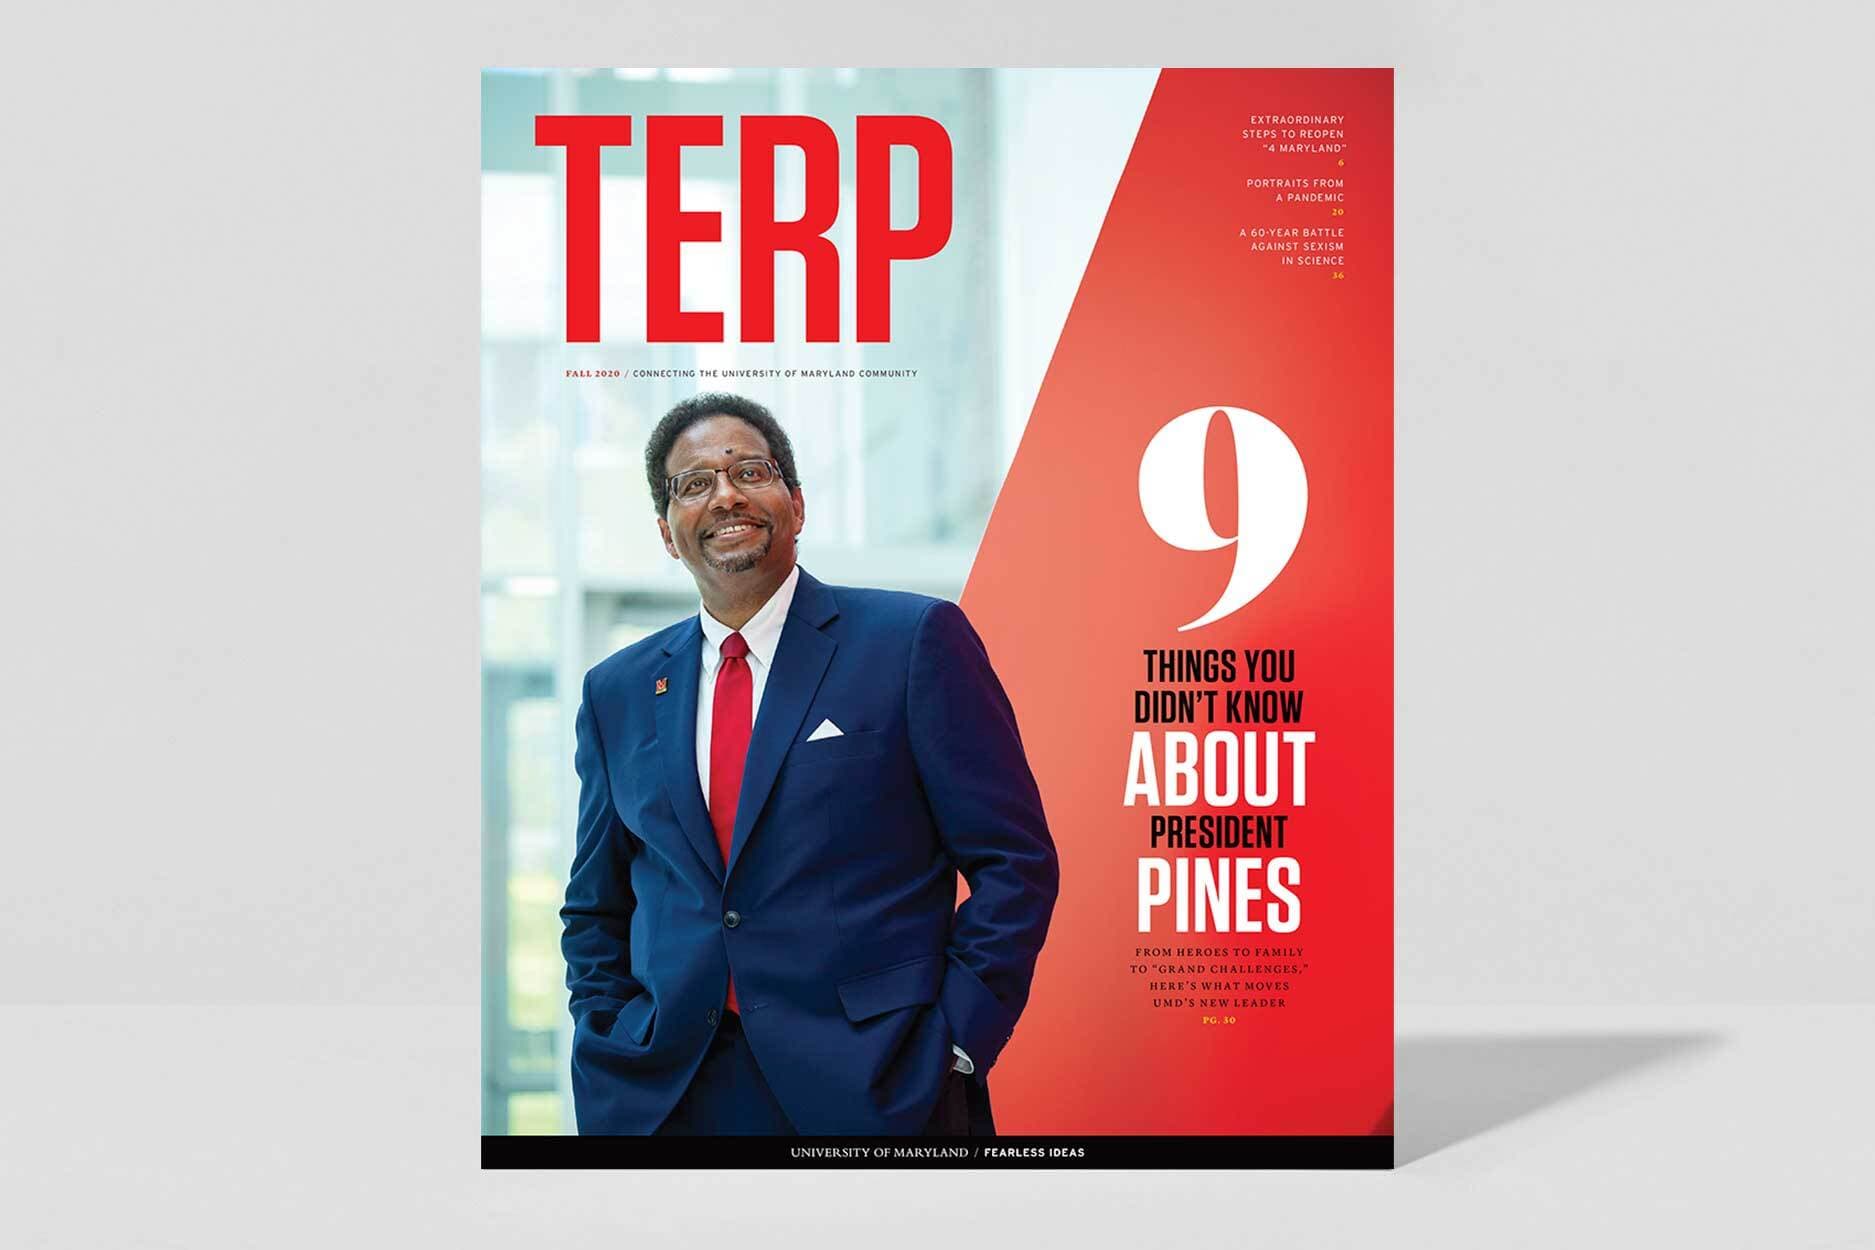 University of Maryland President Darryll J. Pines stands proudly next to the imprinted title of the feature article: 9 things you didn't know about president pines.